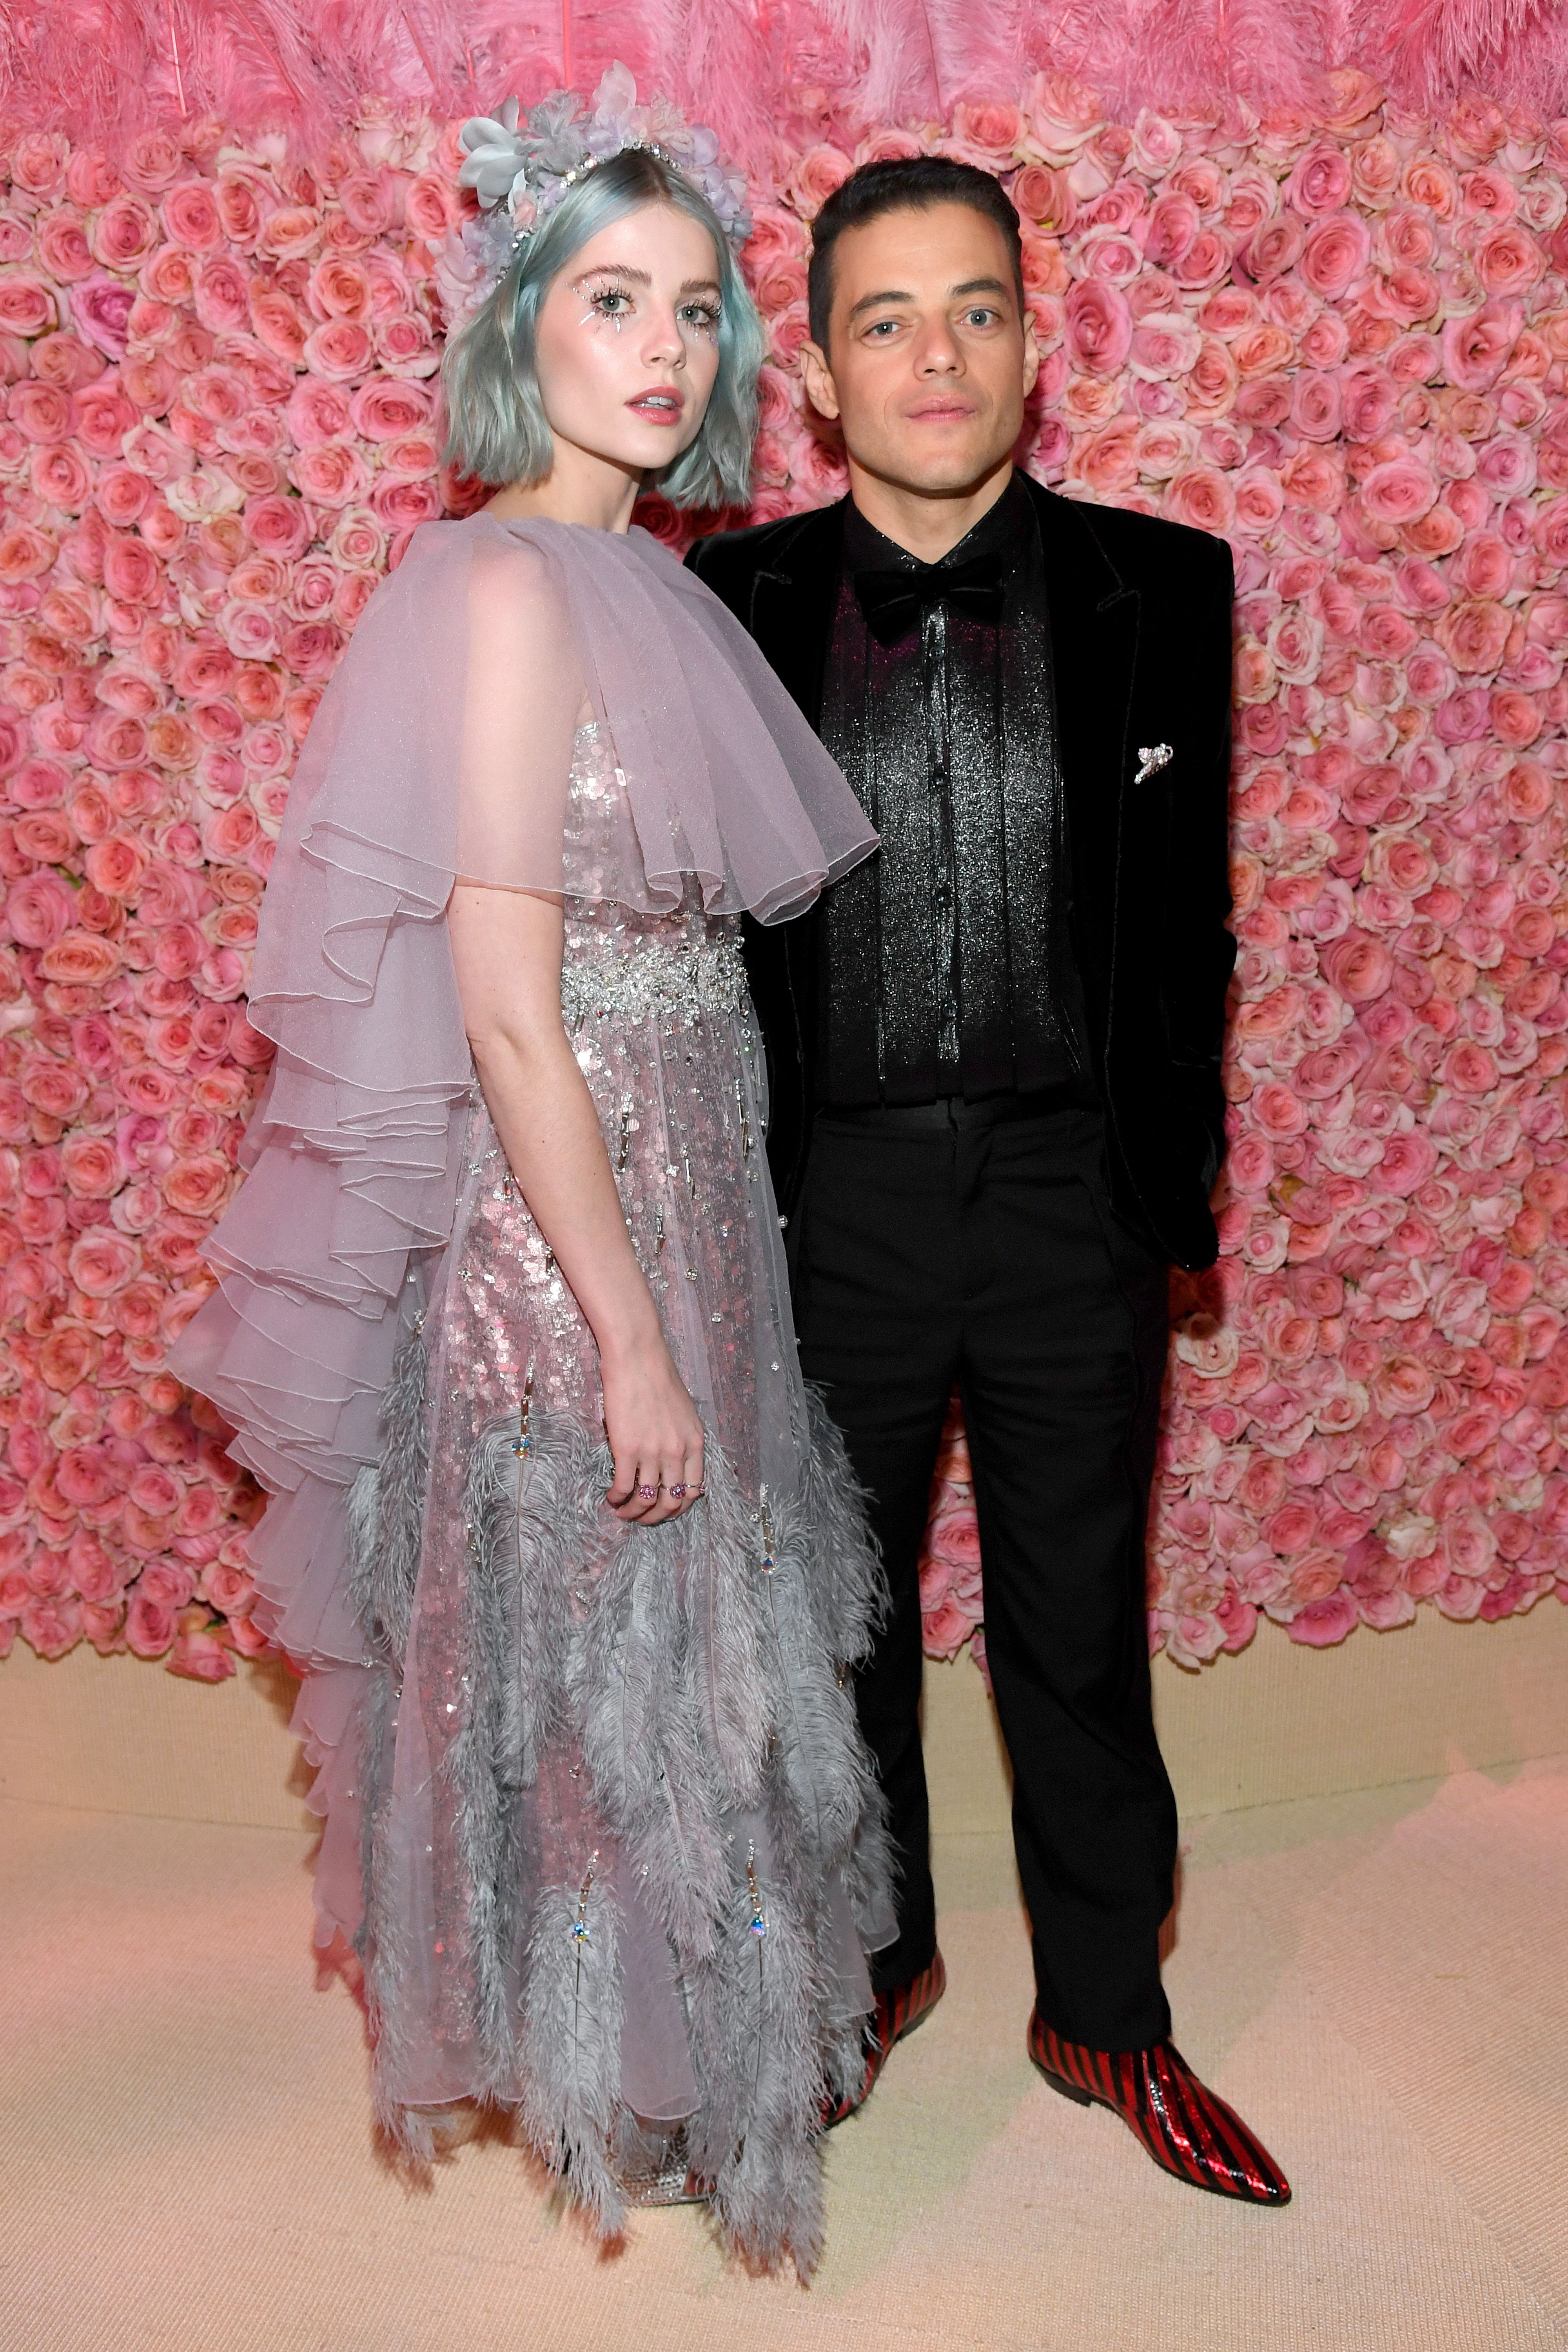 Rami Malek and Lucy Boynton: How They Became a Hollywood Power Couple